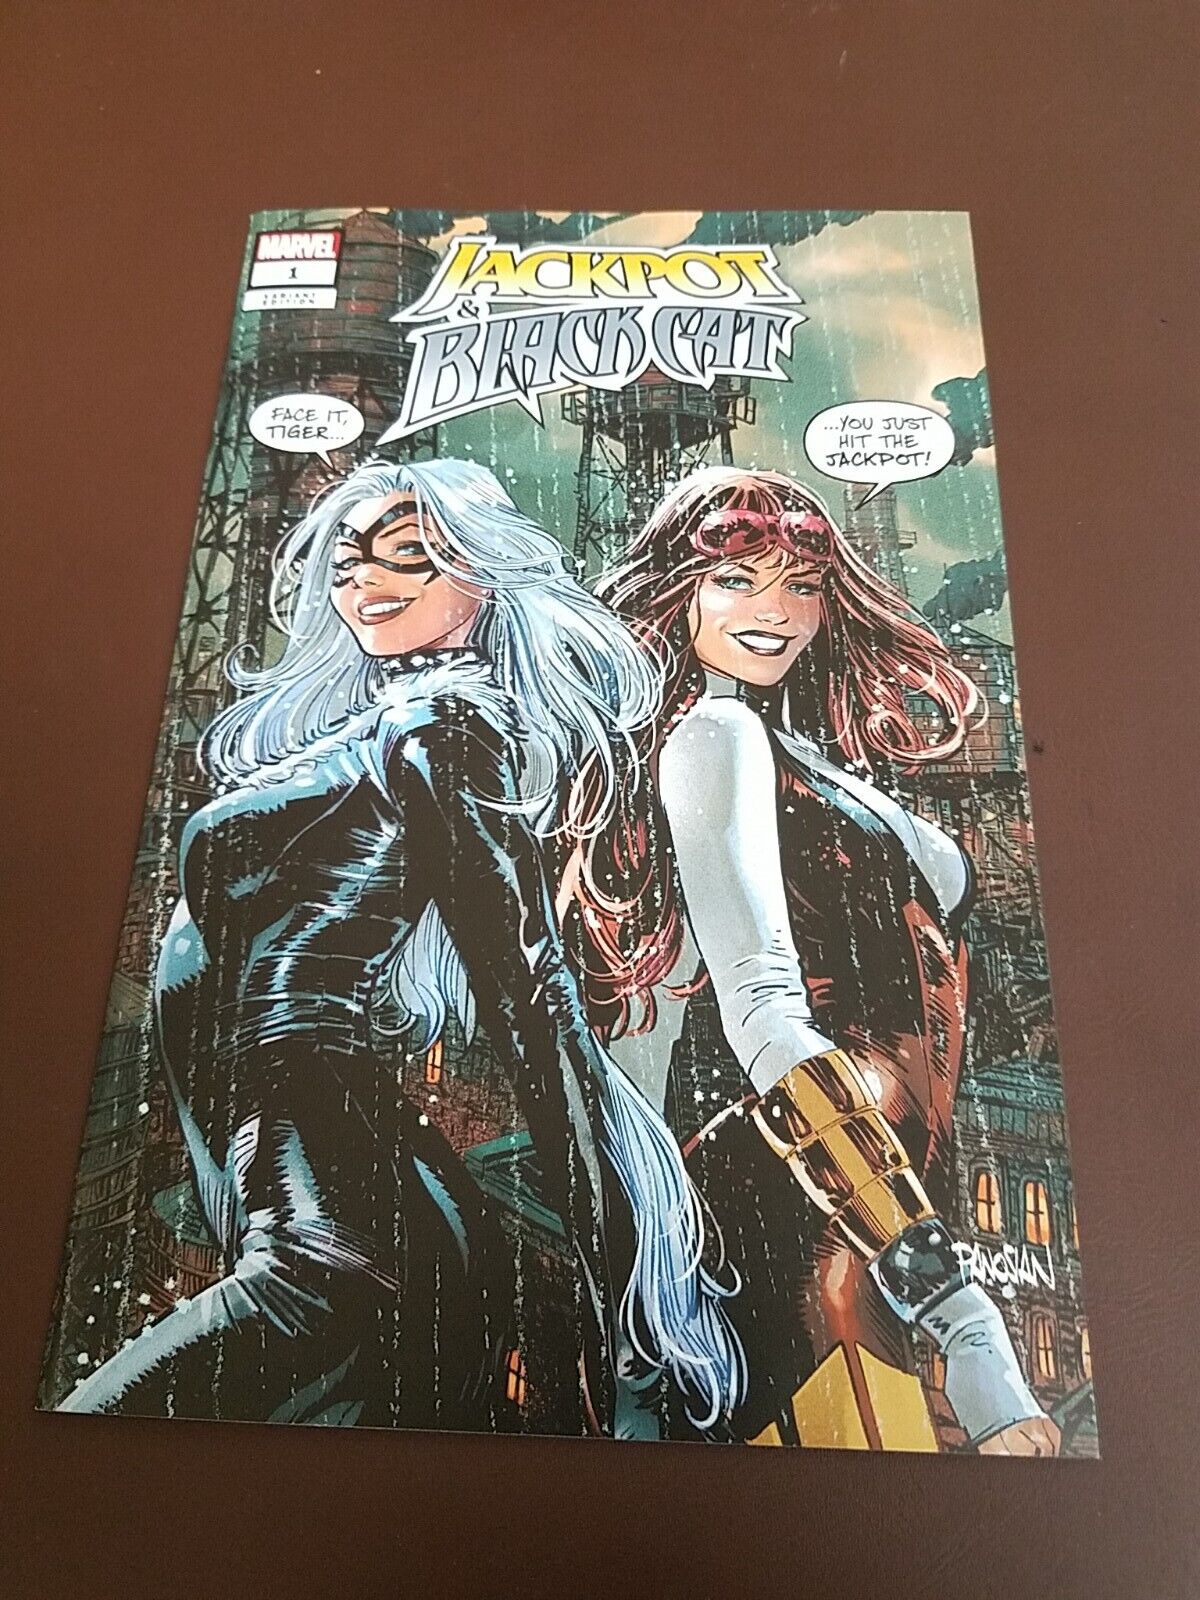 JACKPOT AND BLACK CAT #1 PANOSIAN TRADE DRESS VARIANT NM COMBINED SHIPPING 